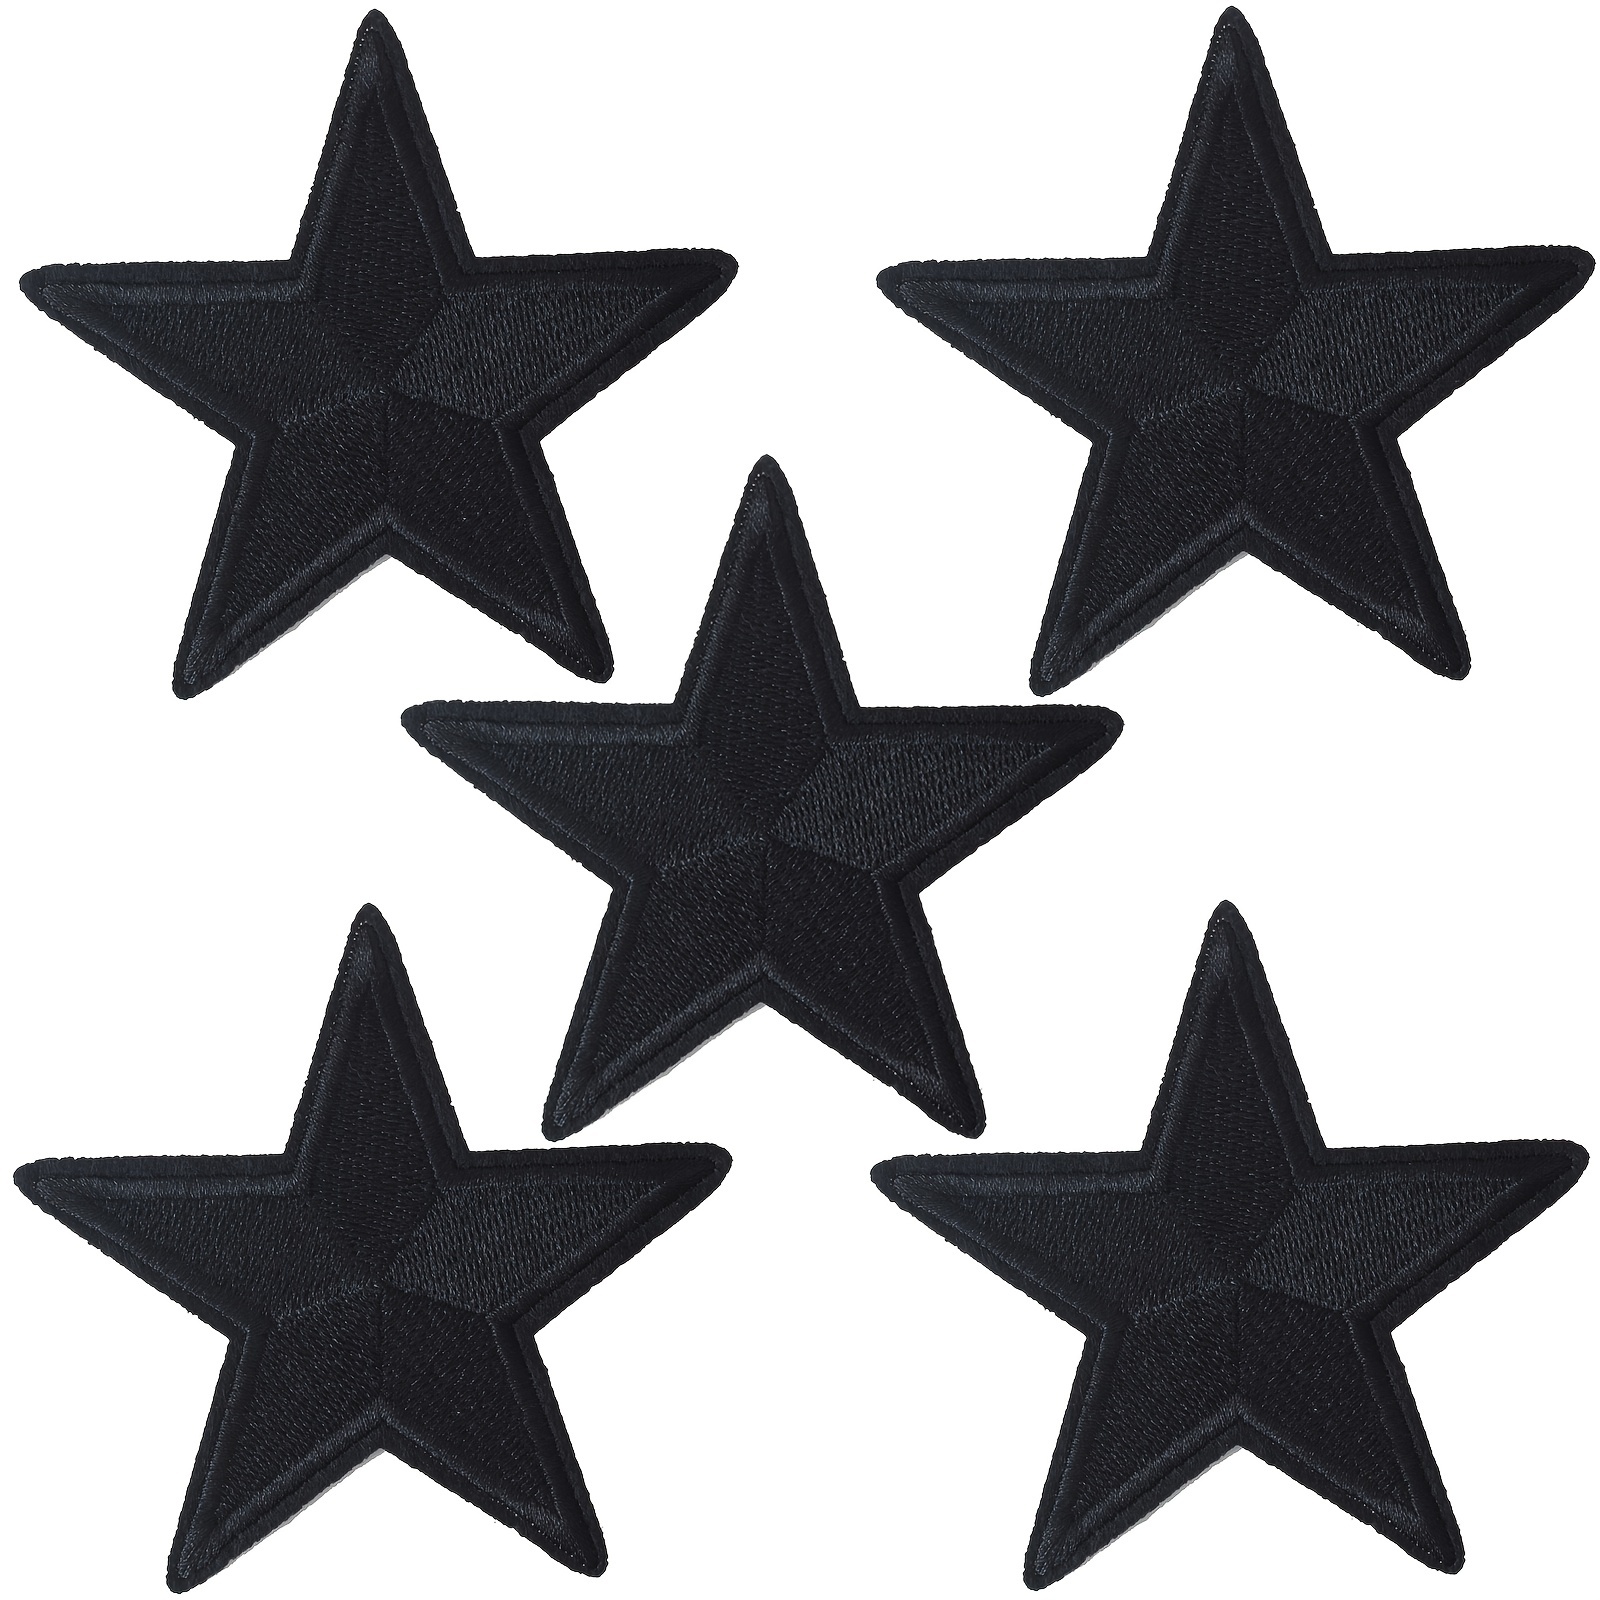 star patch embroidered iron on star applique patch 1 size 9 star patches